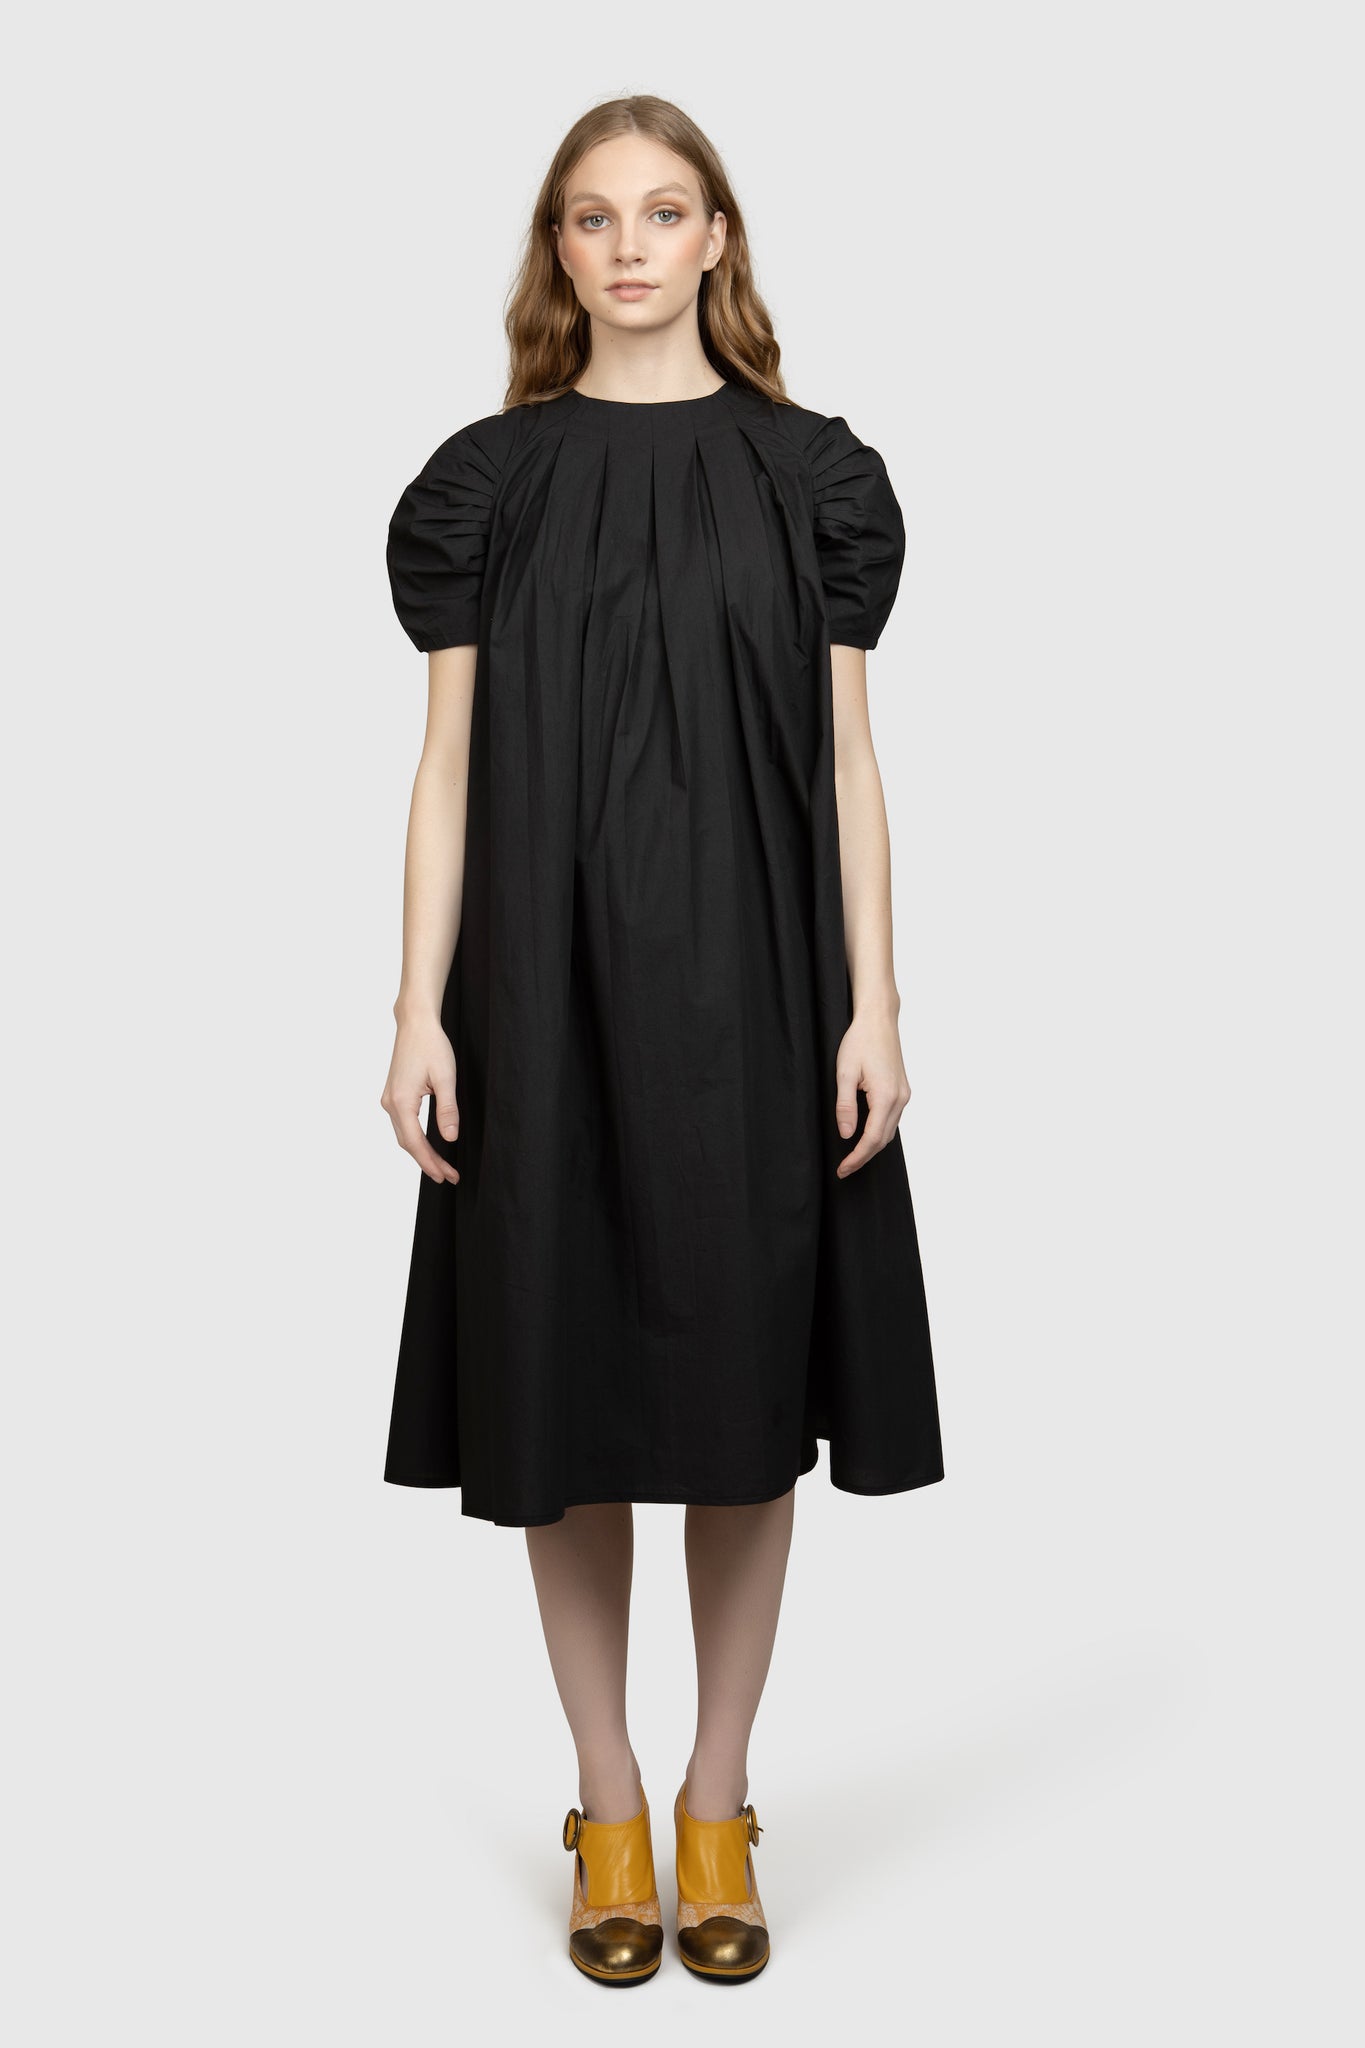 Ethical & Sustainable Dresses for Women - Agaati – Page 2 – AGAATI